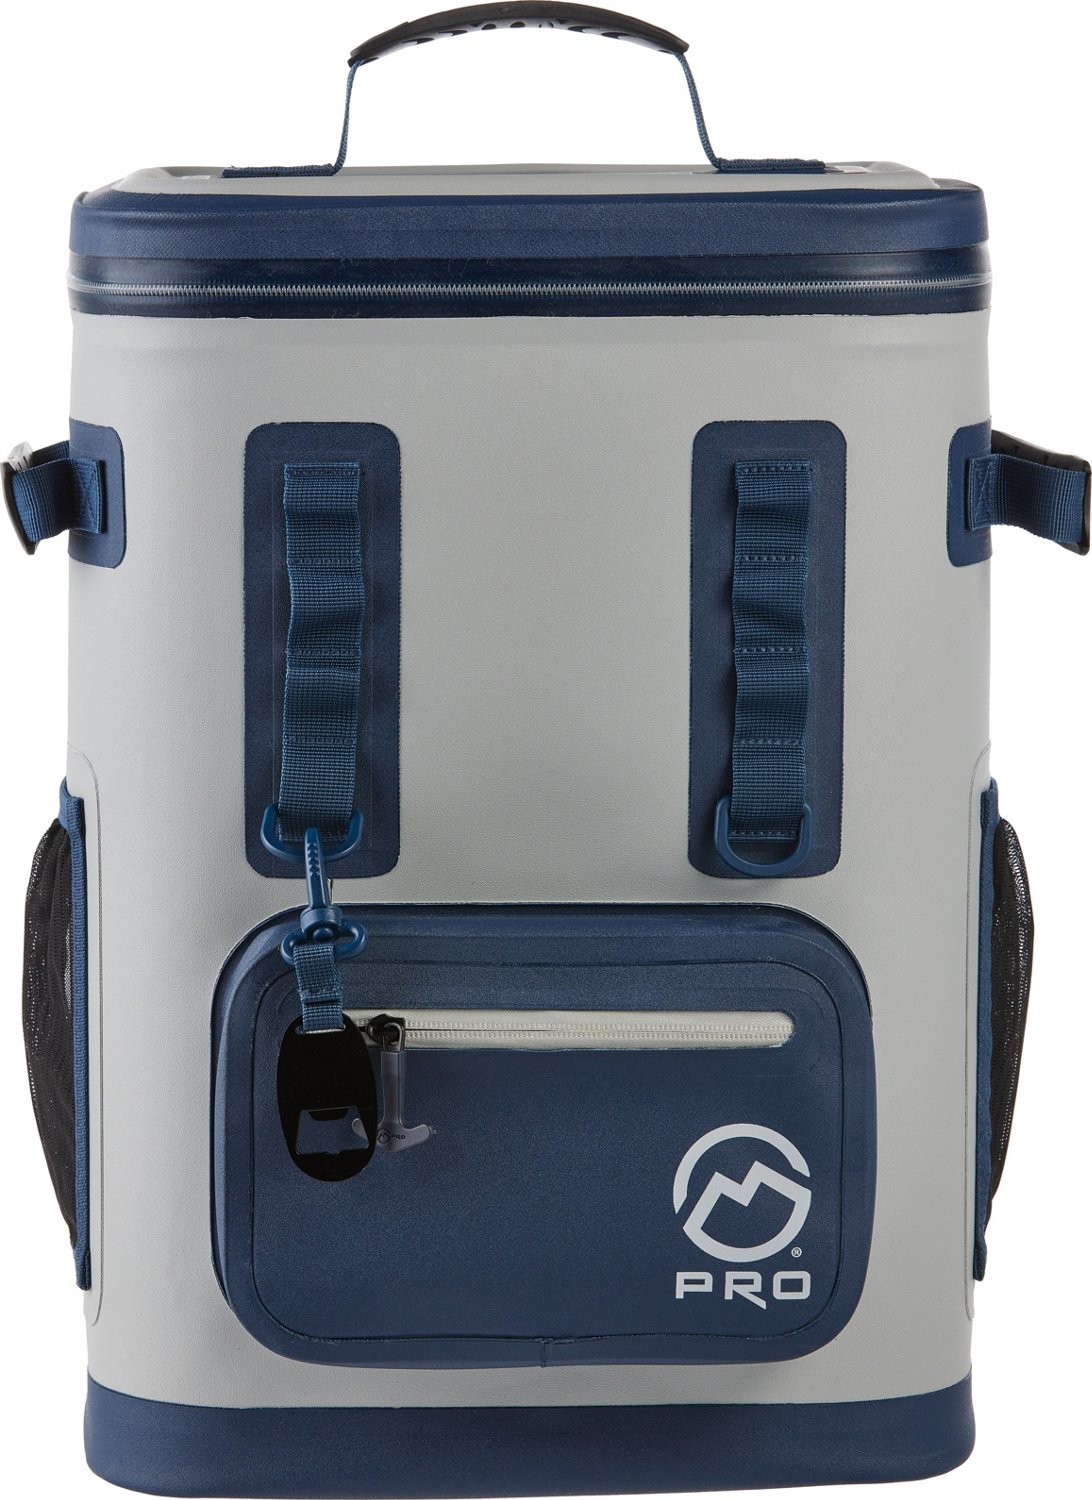 Coho Cooler Bag, 24 Can Personal Cooler and Lunch Box